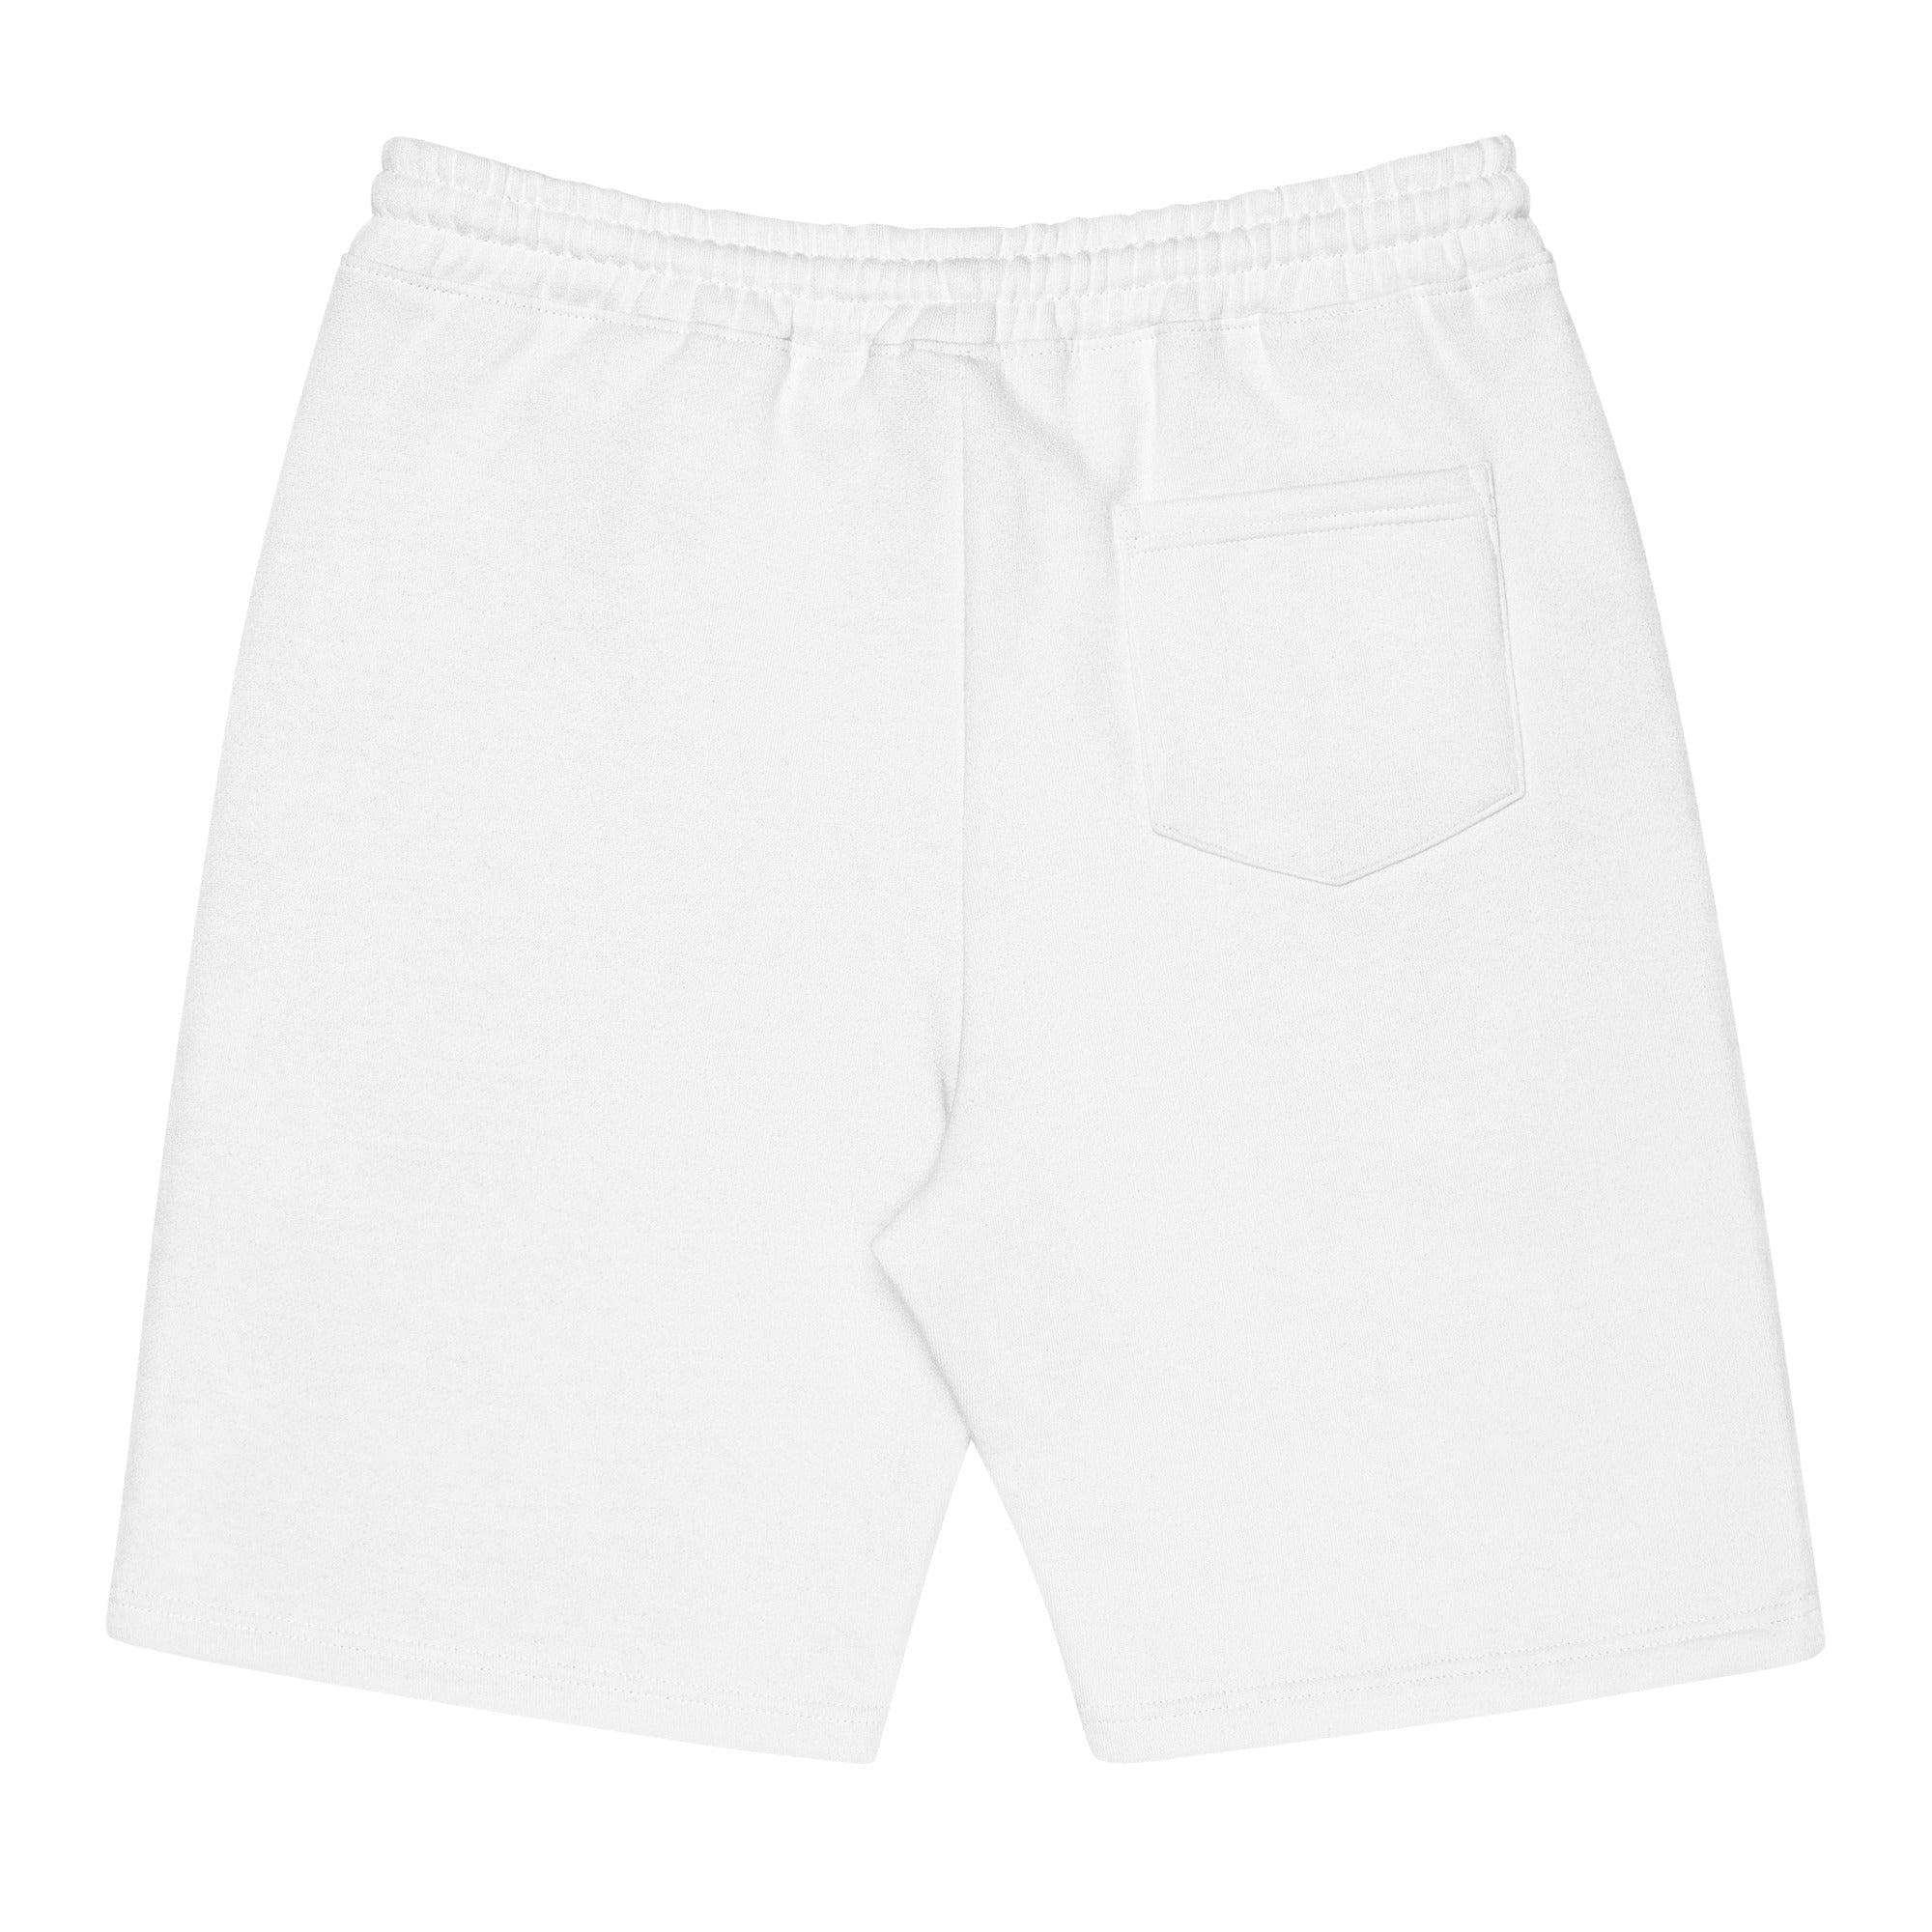 Never Stop Creating Embroidered Men's fleece shorts